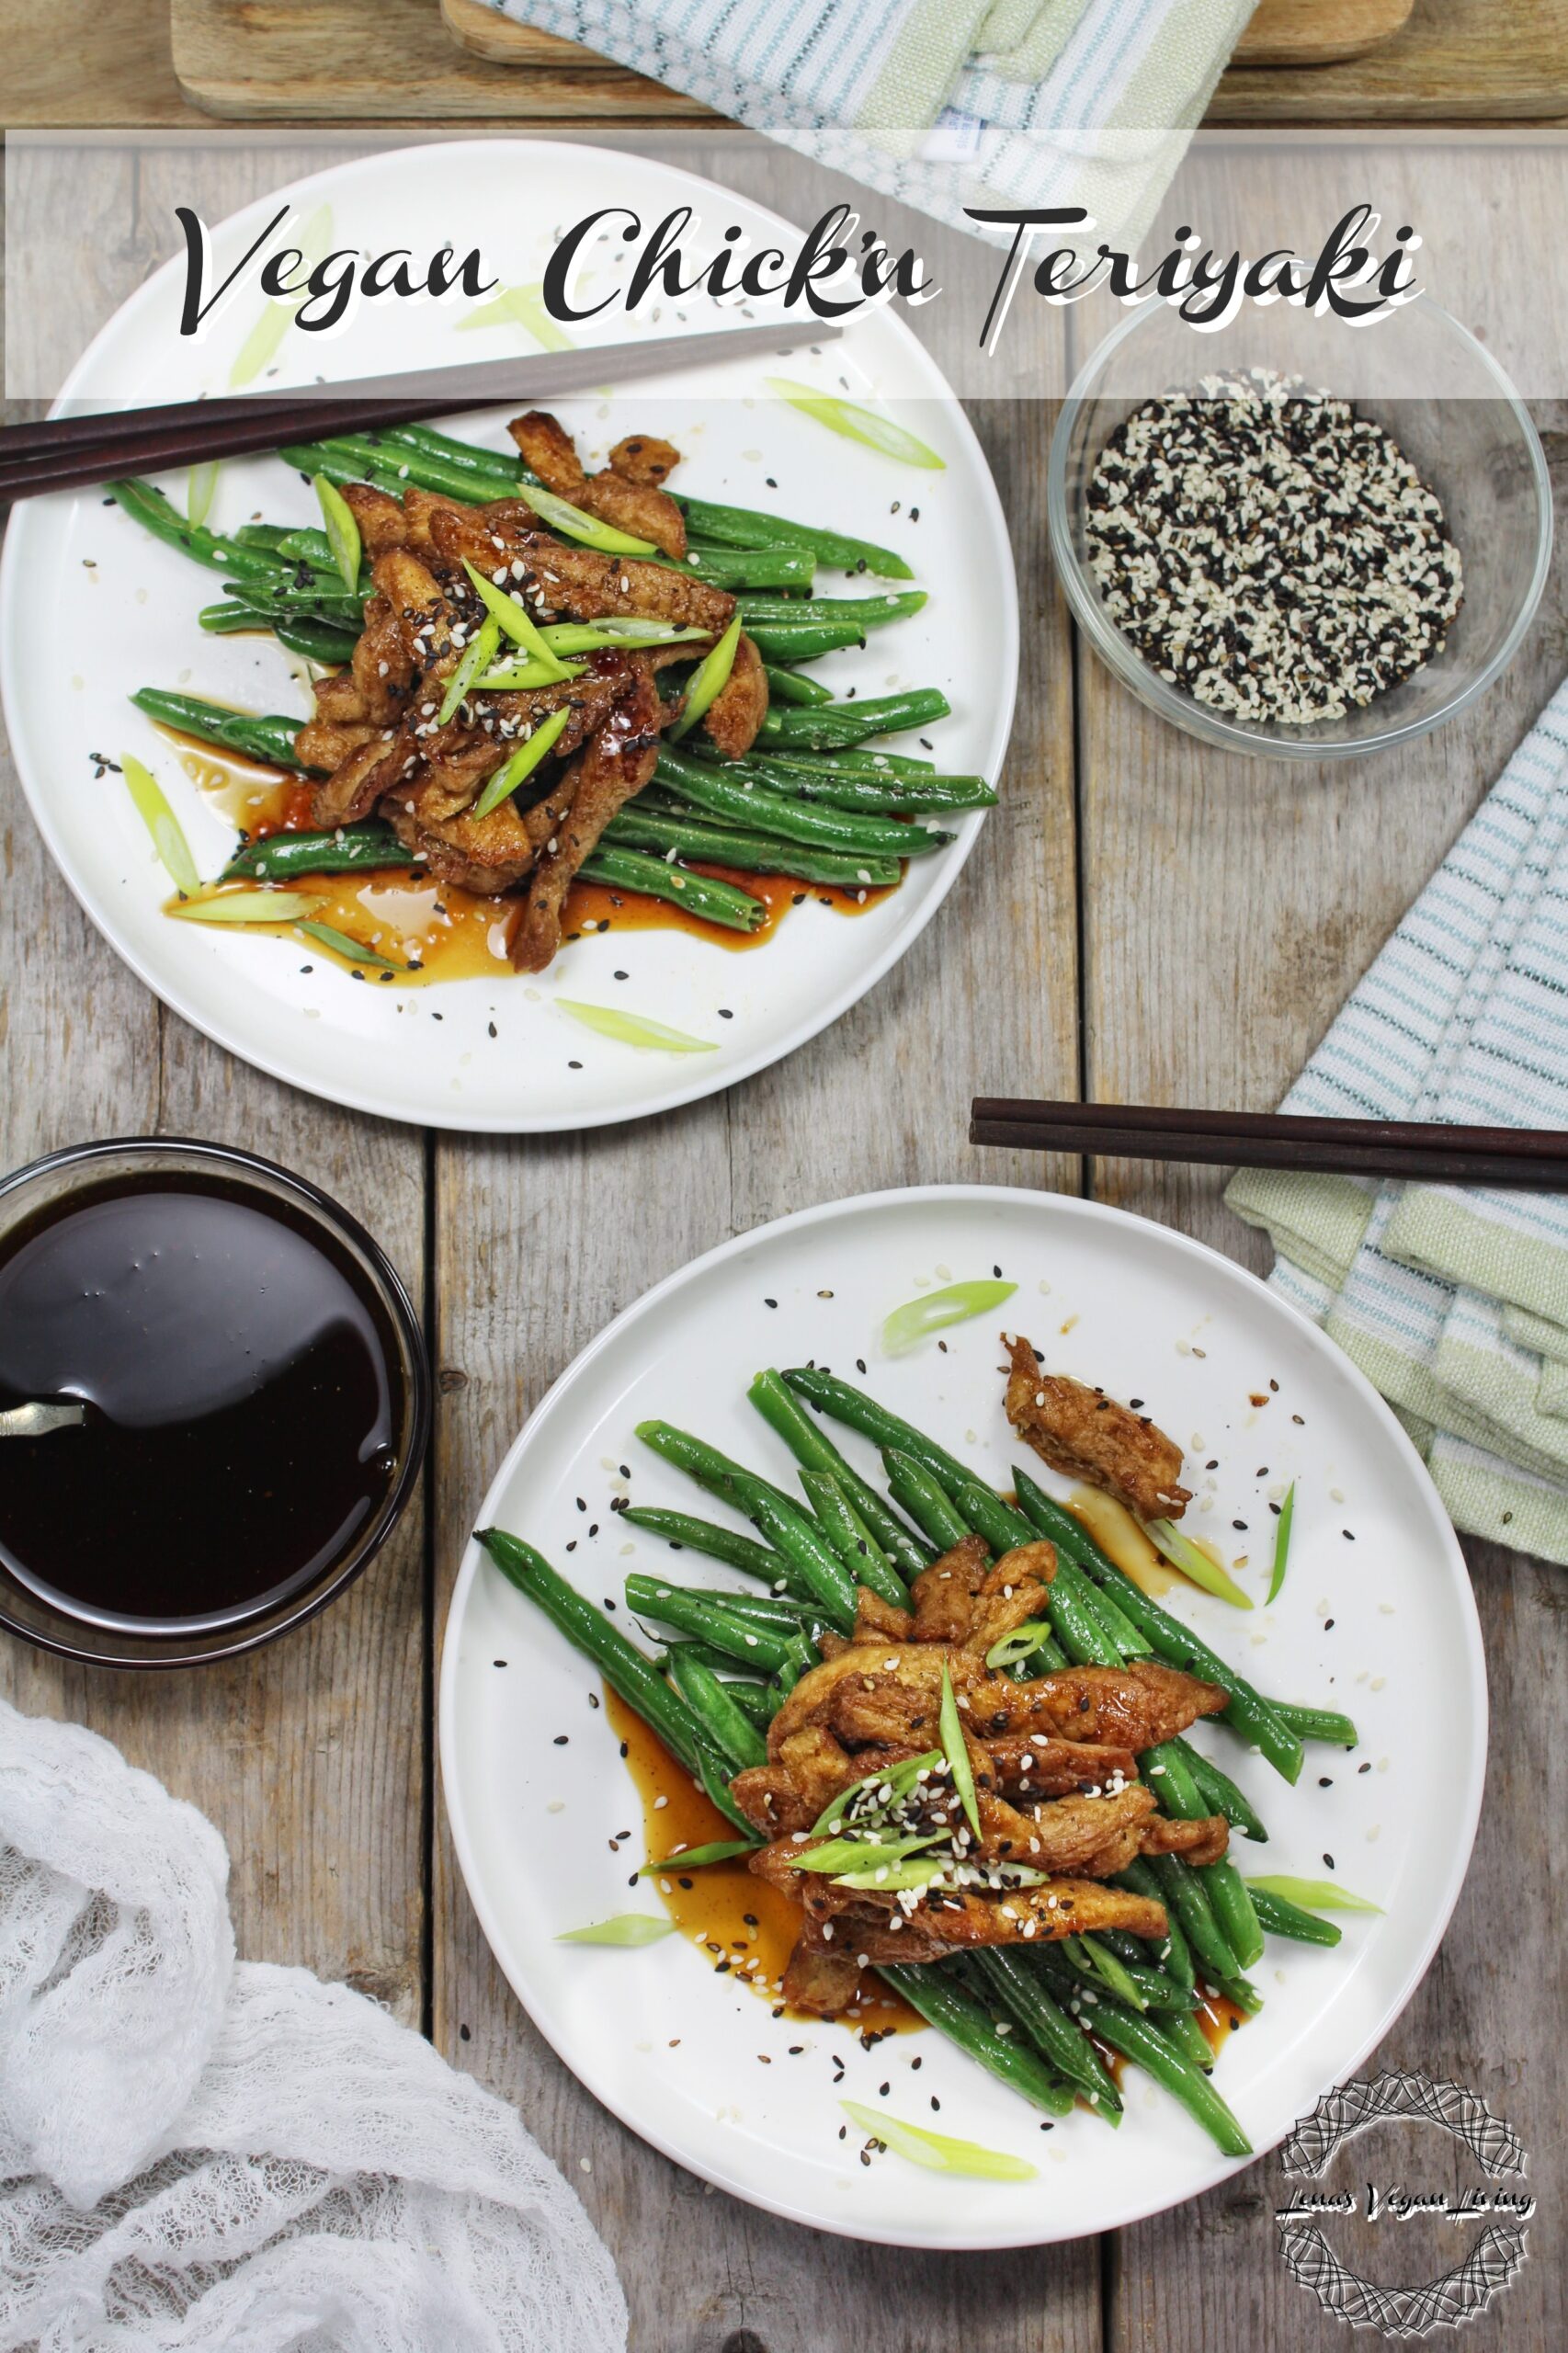 Vegan Chick’n Teriyaki with Homemade Sauce has all the delicious flavors of Japanese cuisine, yet it is a healthier version of the restaurant kind. Vegan - Gluten Free